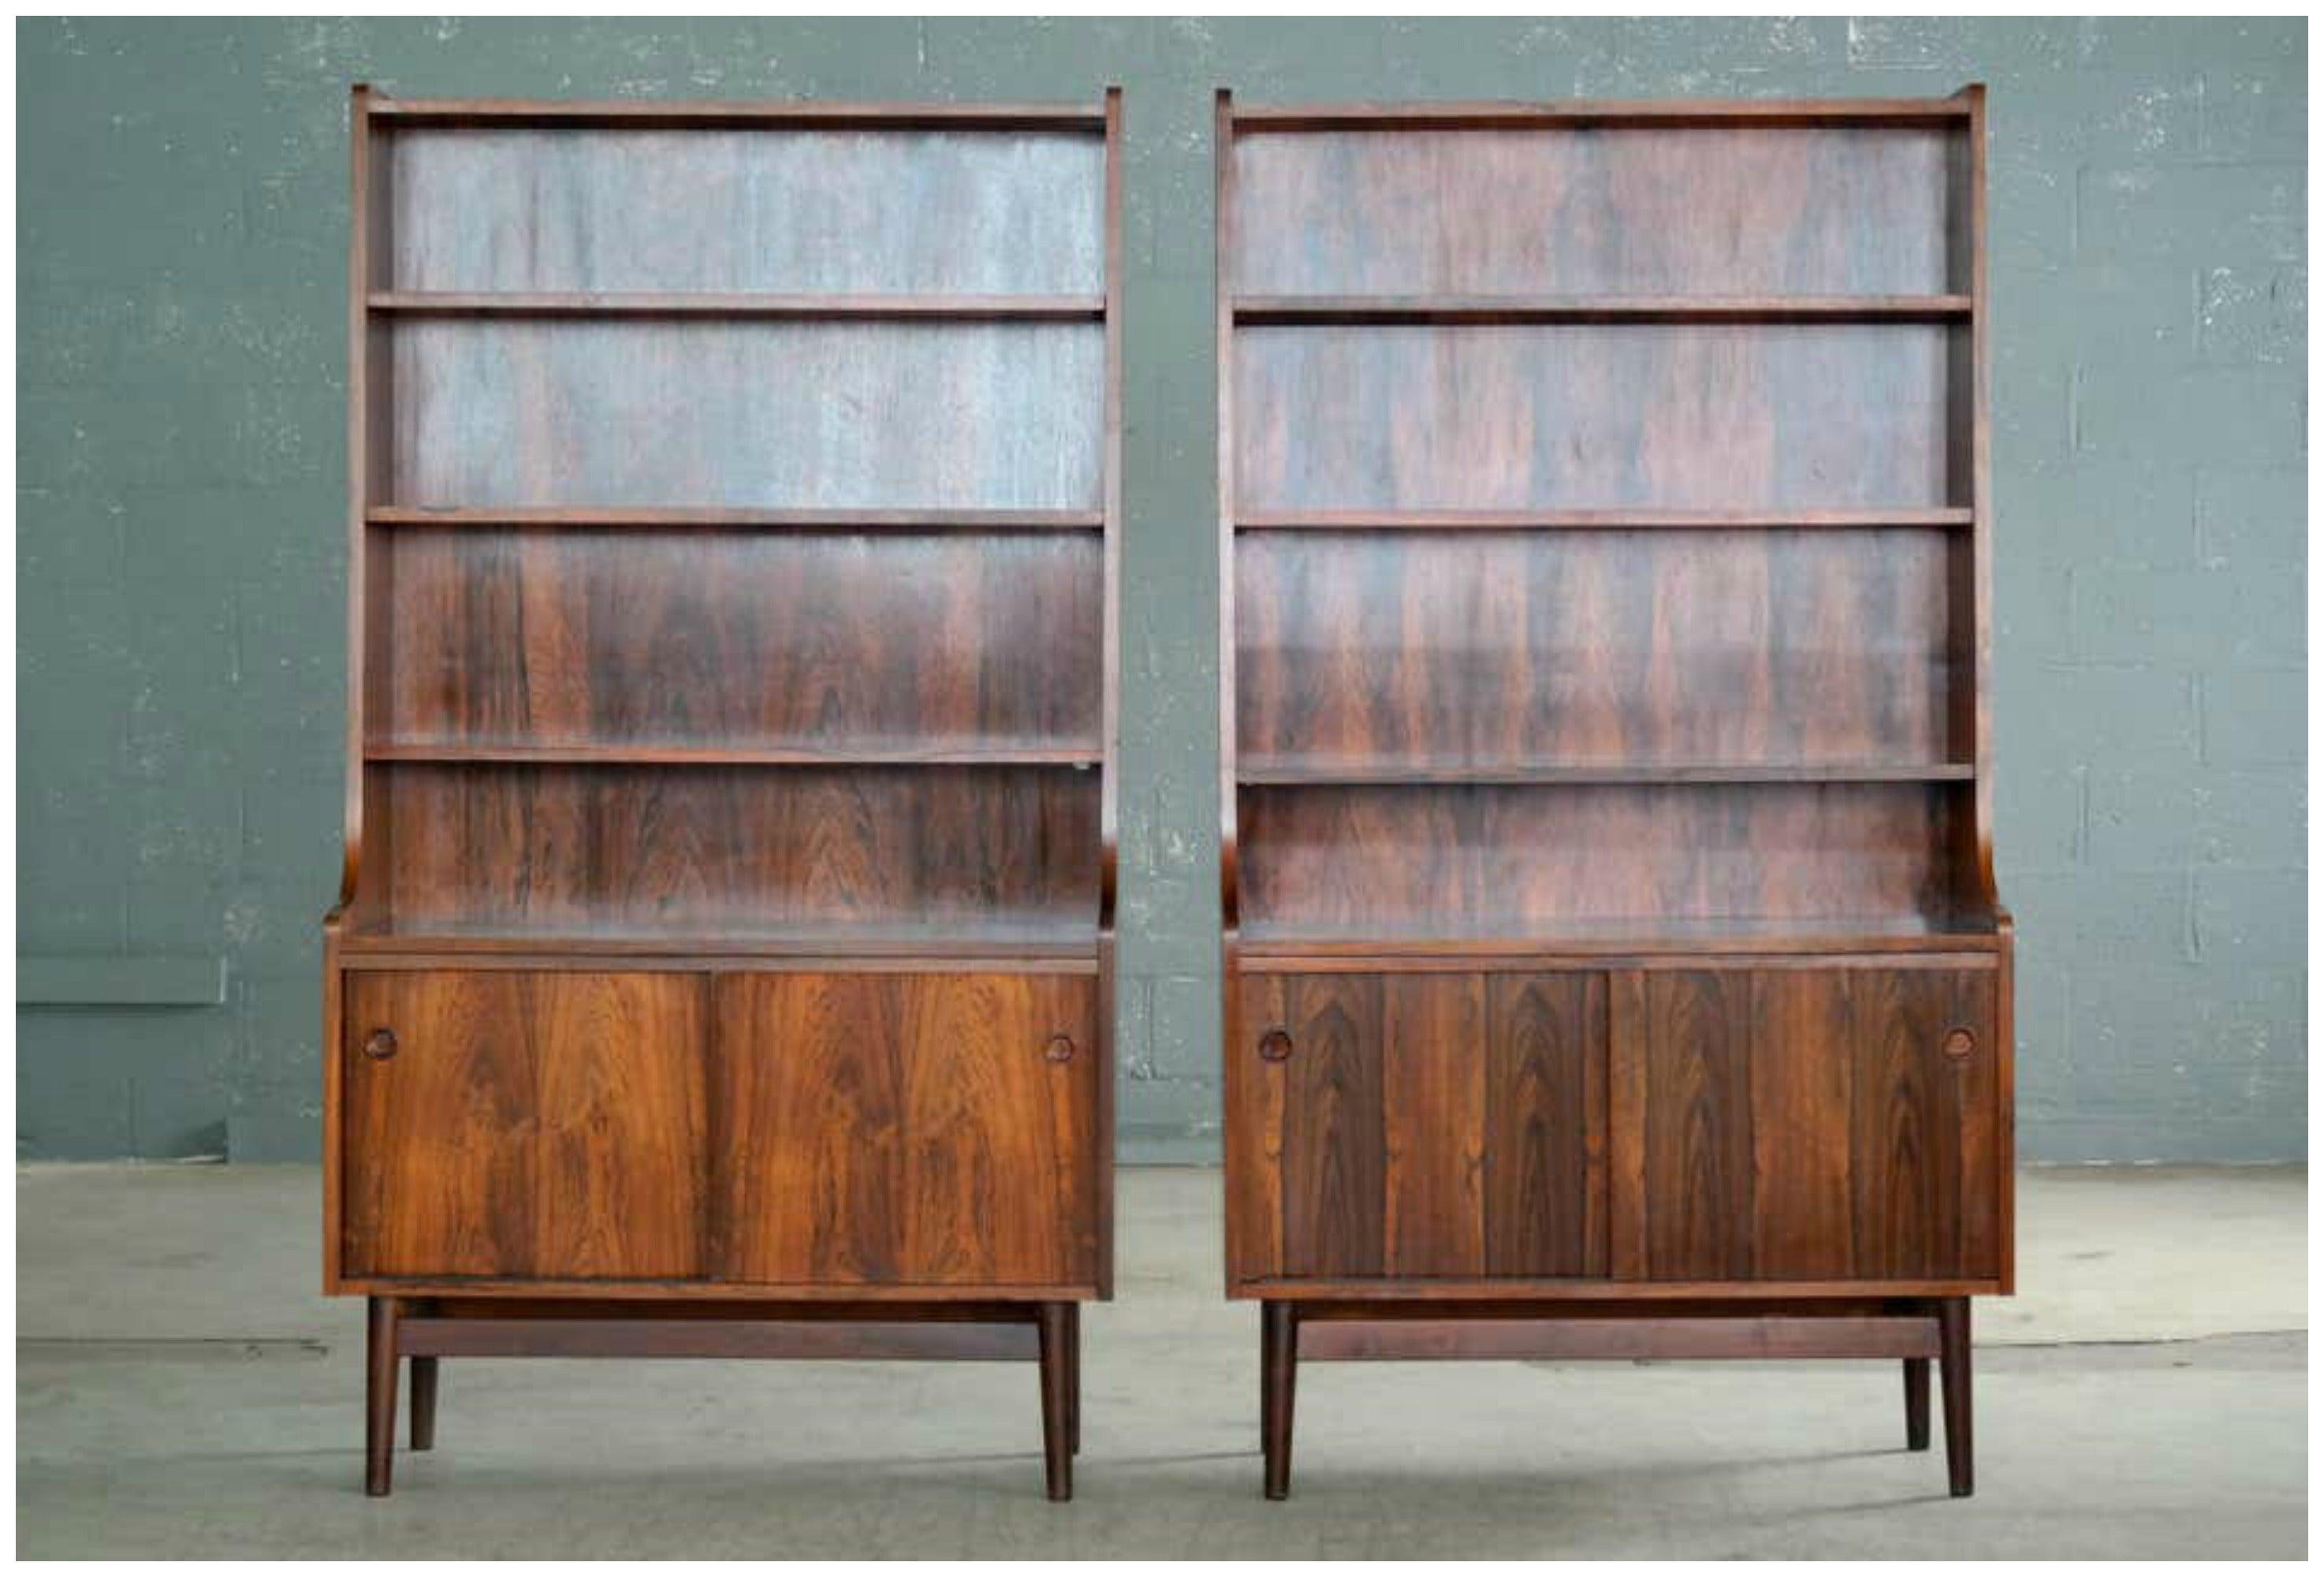 Beautiful and elegant pair of bookcases in bookmatched rosewood with beautiful slightly faded color and rich grain. Designed by Johannes Sorth for Bornholm's Mobler also known as Nexoe Teak. Very versatile with adjustable shelves and two storage